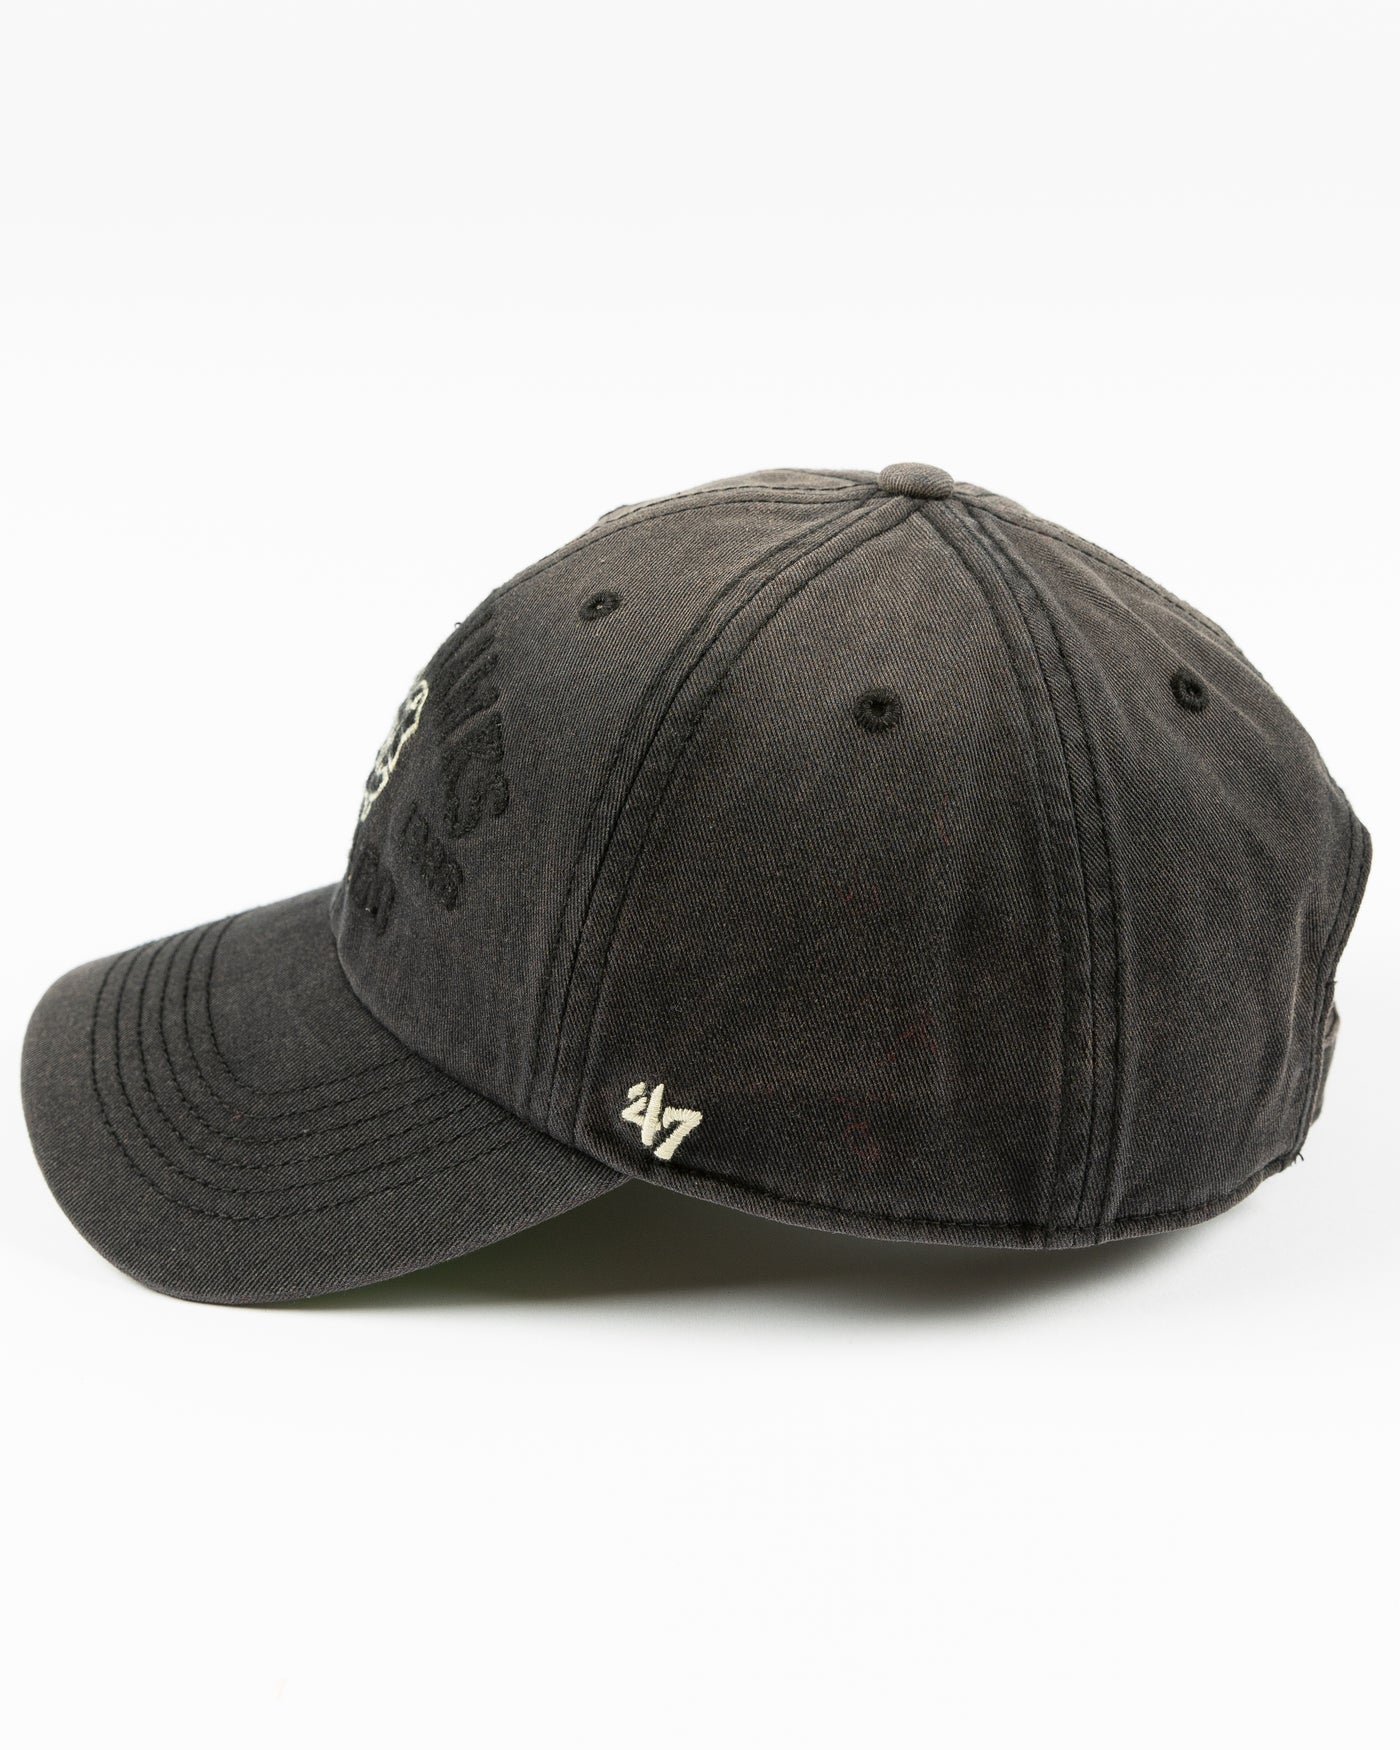 '47 brand washed black adjustable cap with Chicago Blackhawks wordmark and secondary logo embroidered on front - left side lay flat